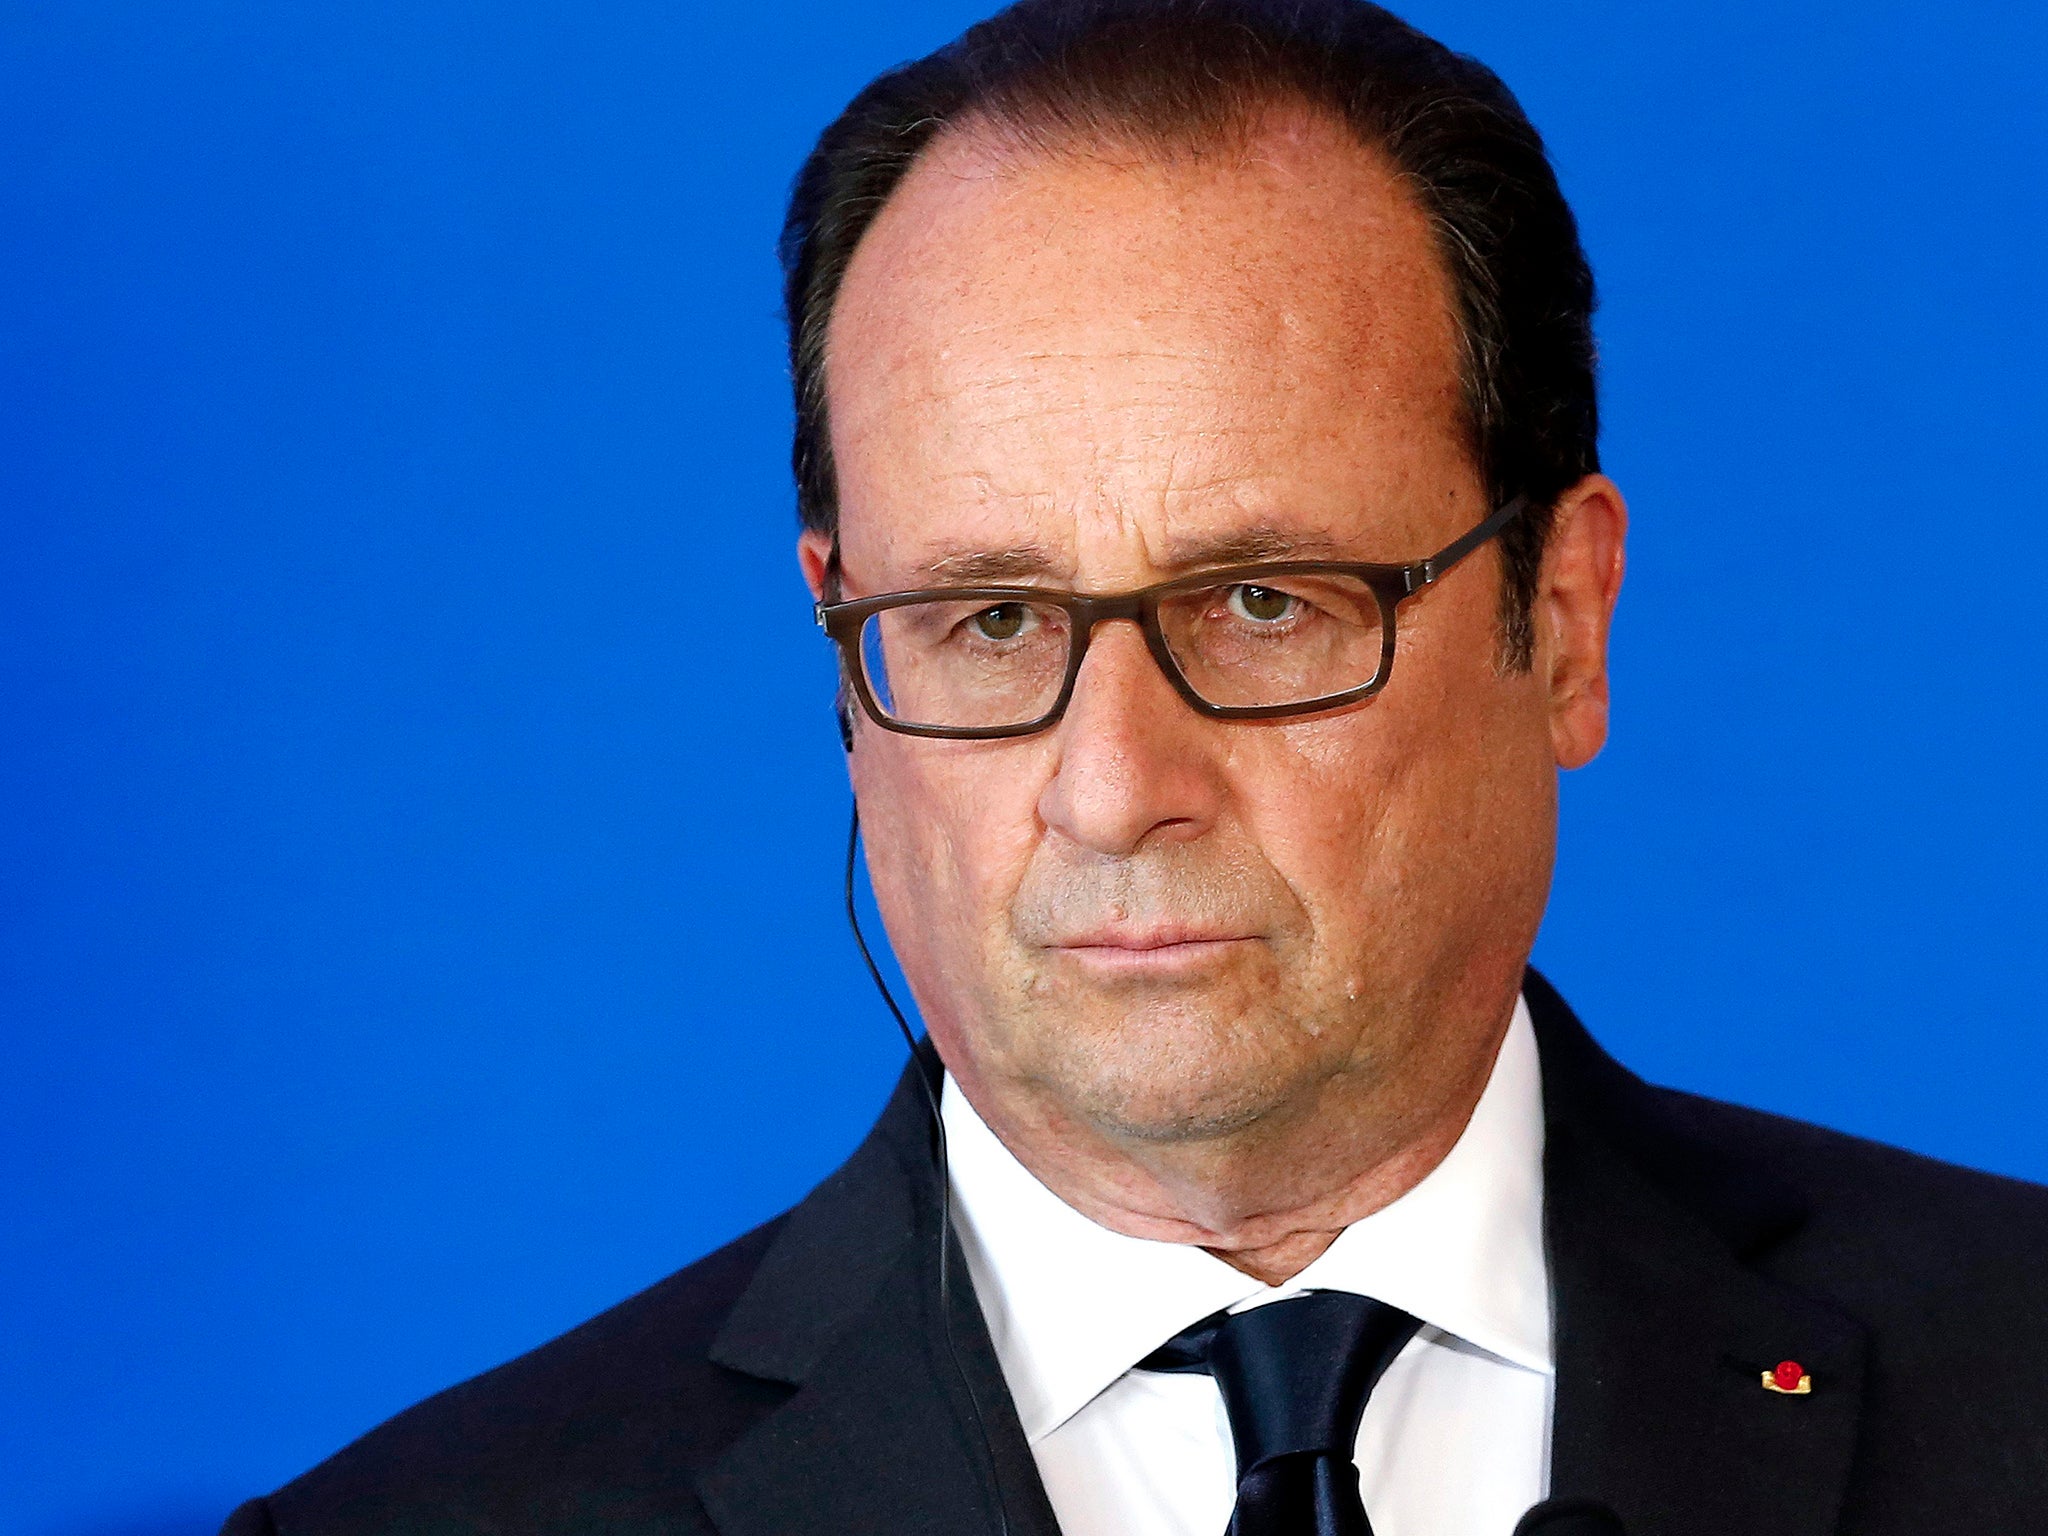 Mr Hollande says the US President is putting an 'unacceptable' strain on what Europe 'should or should not be'